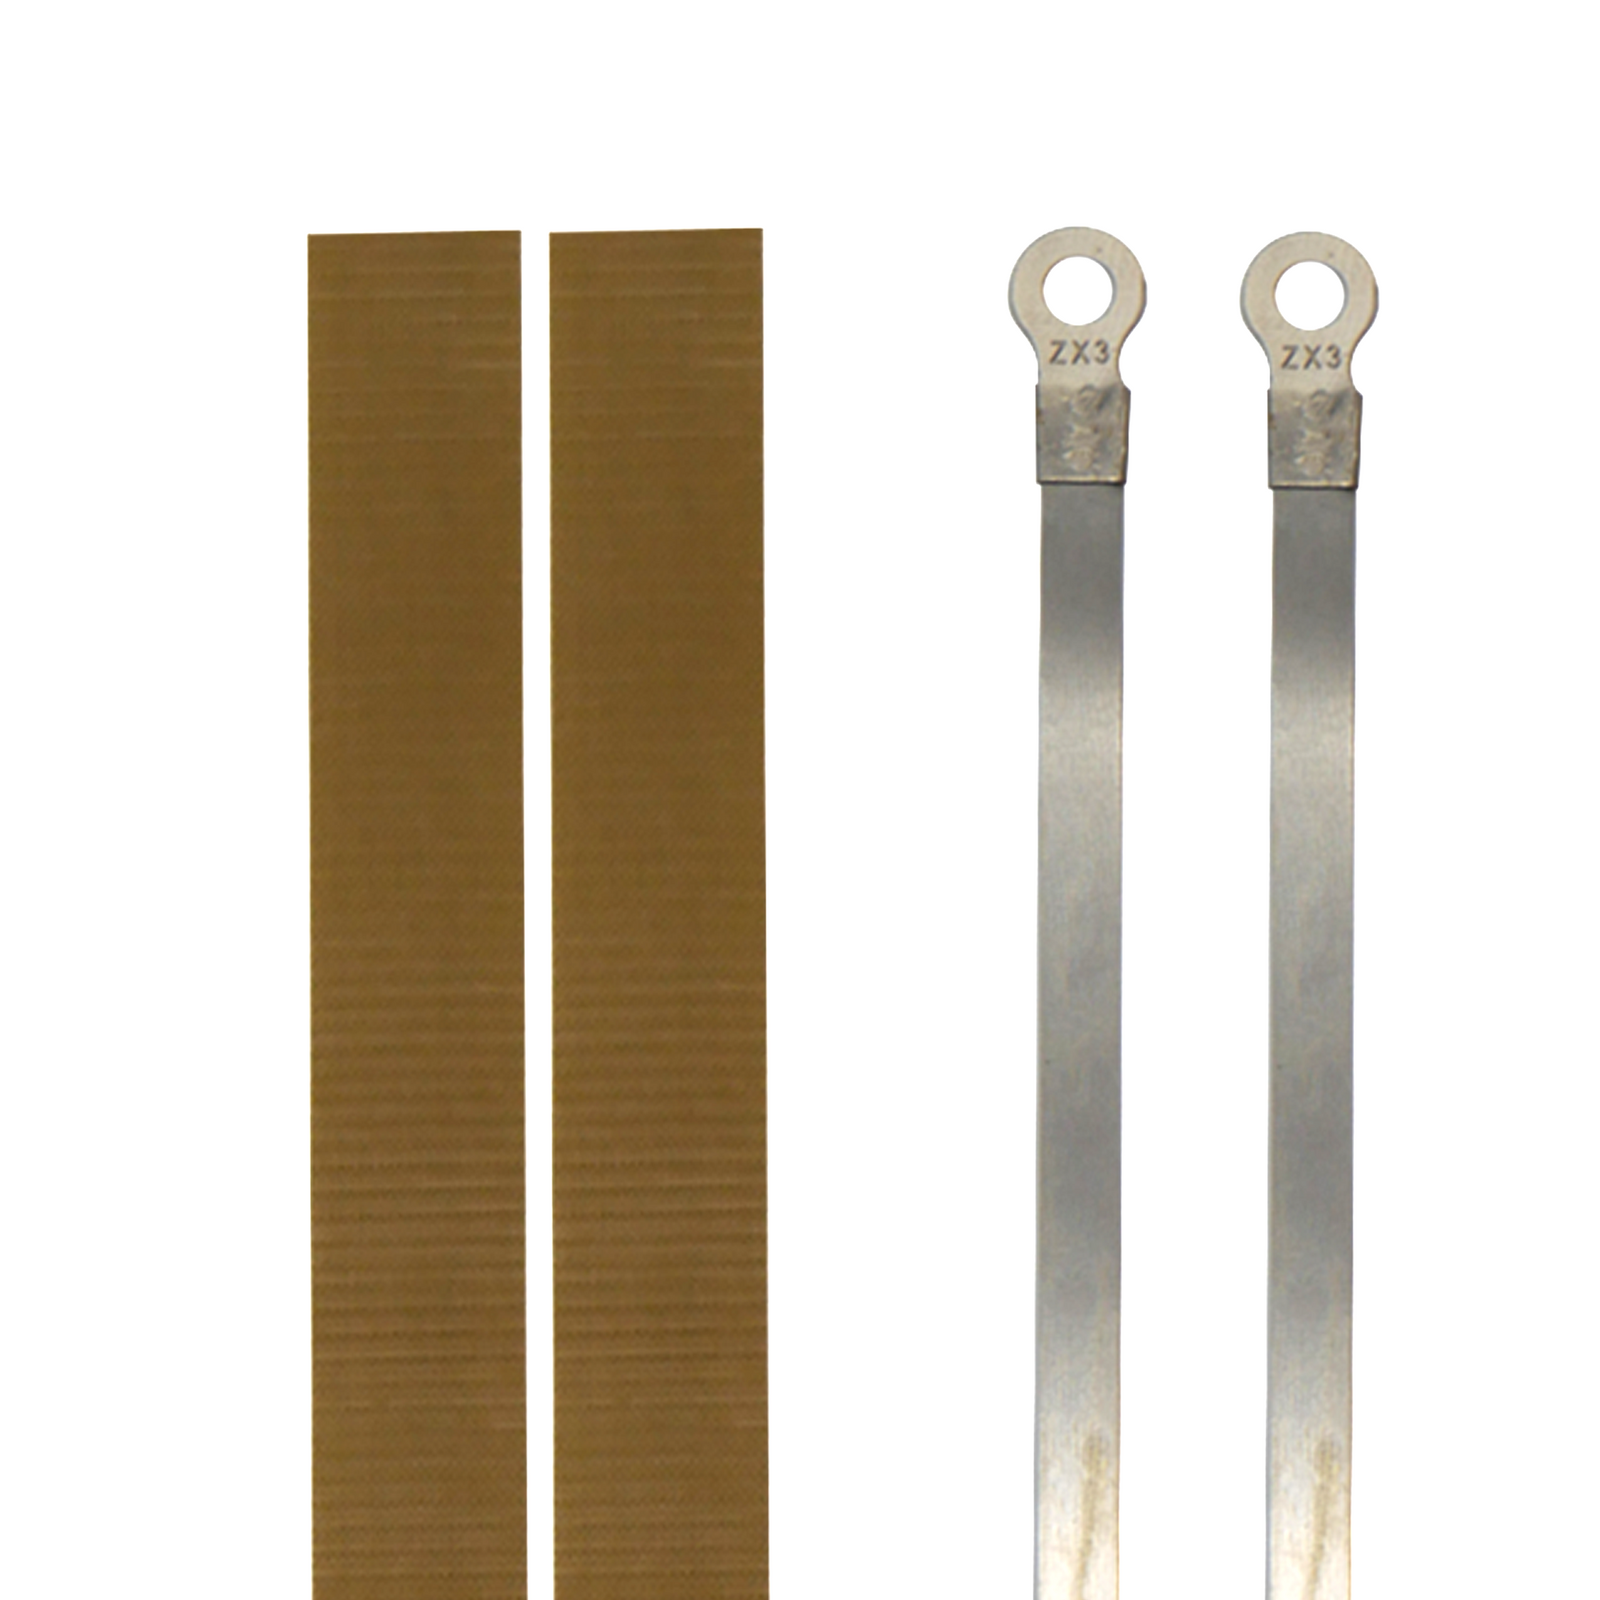 Set of 2 PTFE  pre cut Strips and 2 Heating Element Replacement kits for manual impulse sealers